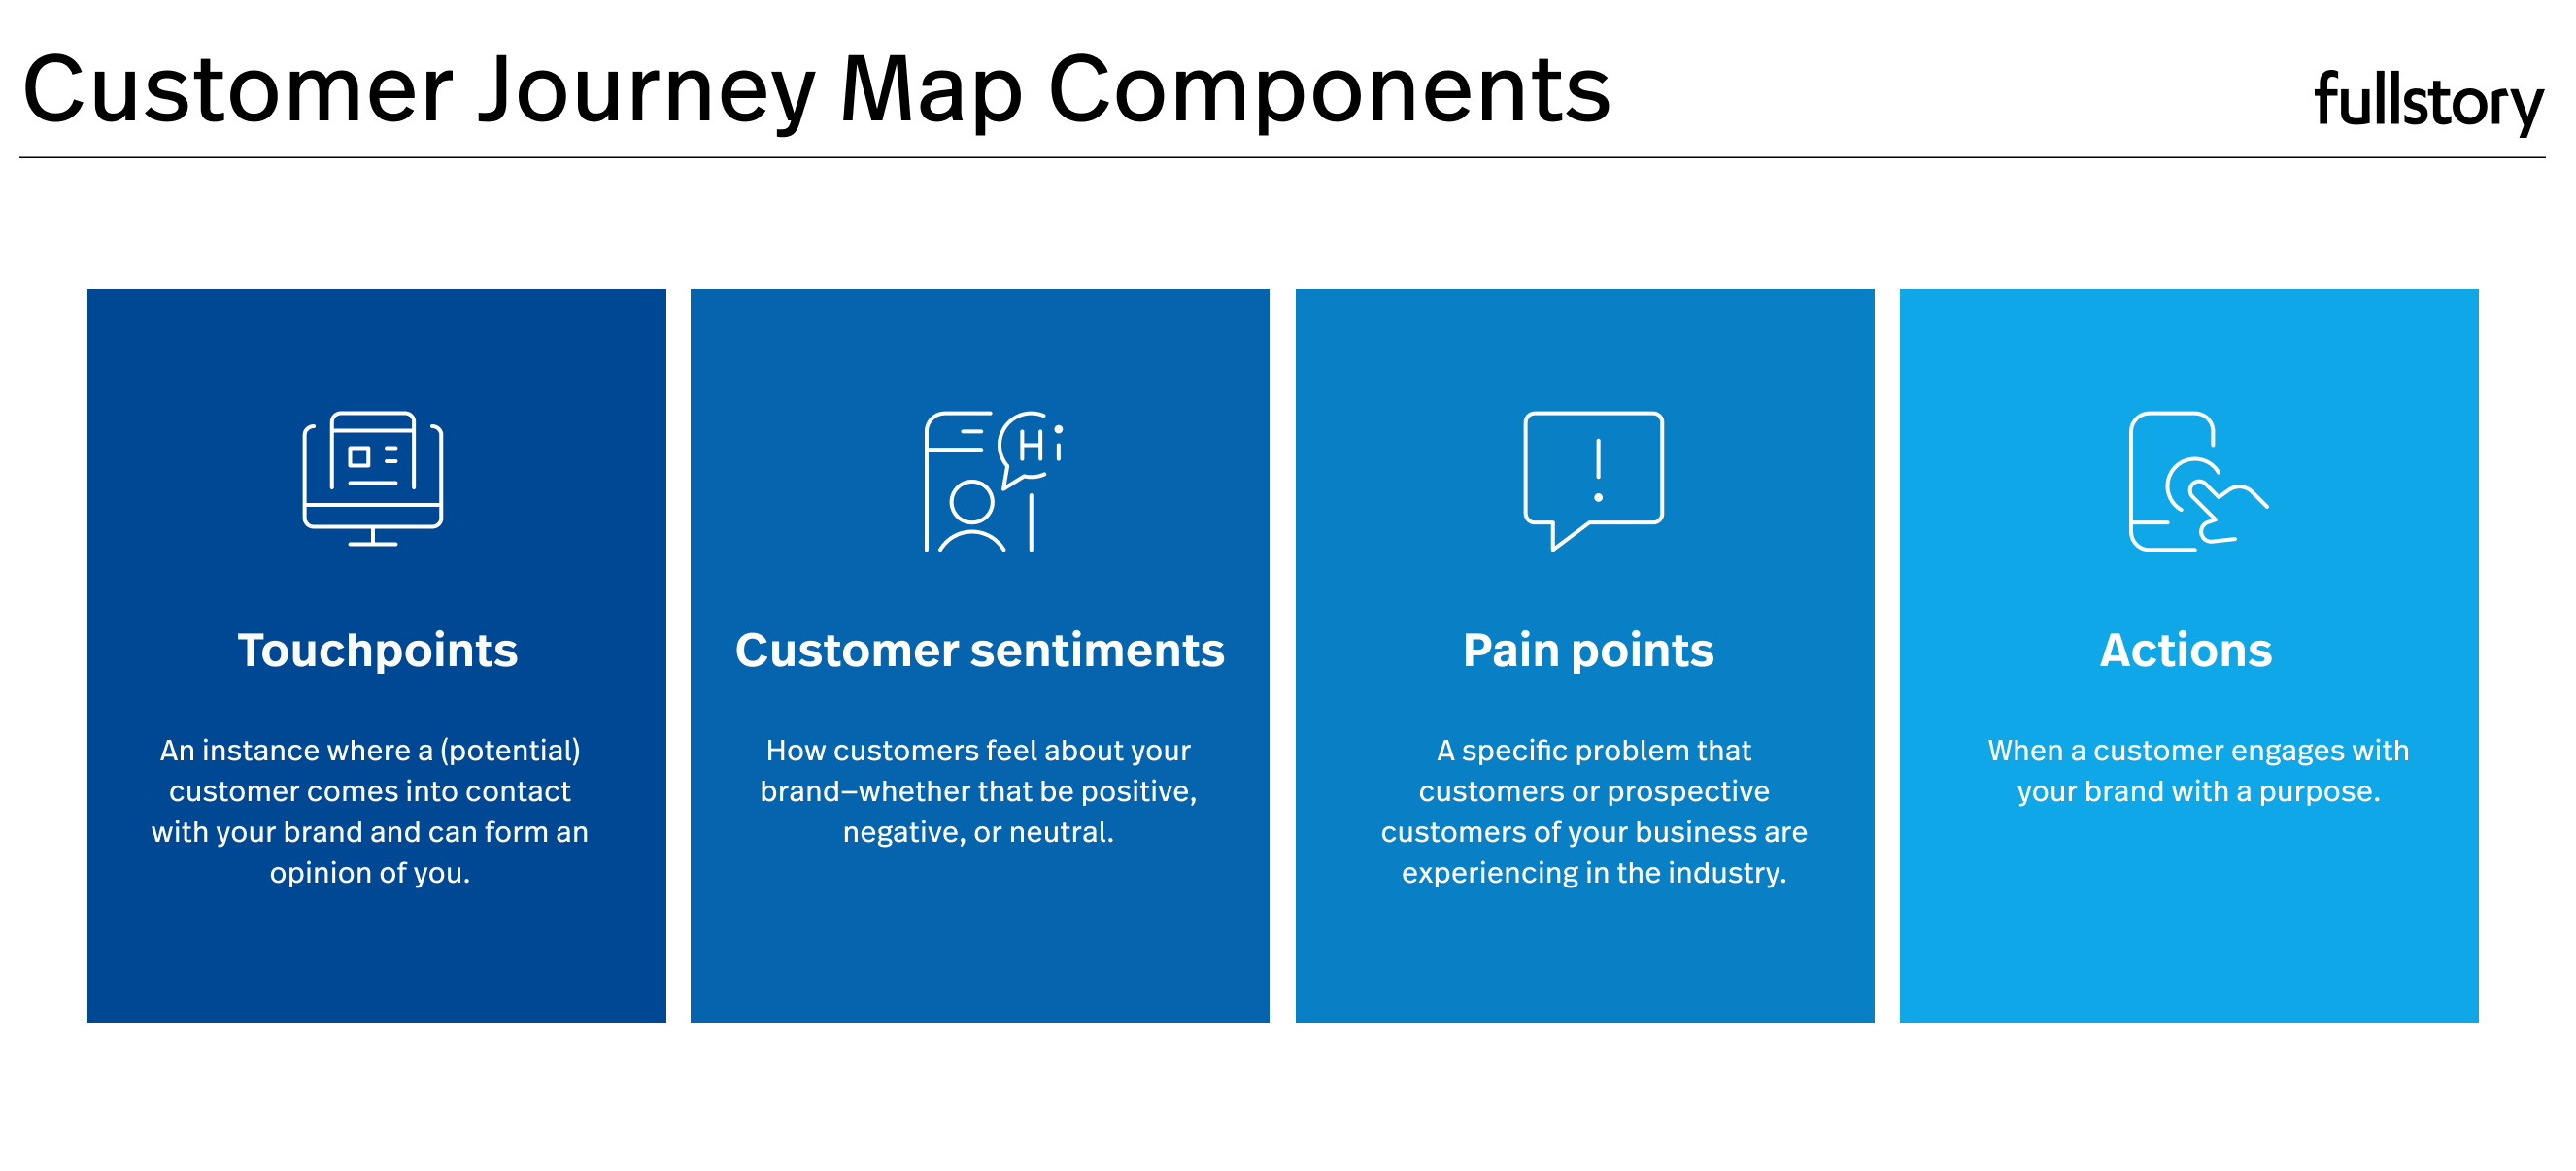 Customer journey map components: Touchpoints, customer sentiments, pain points, actions.